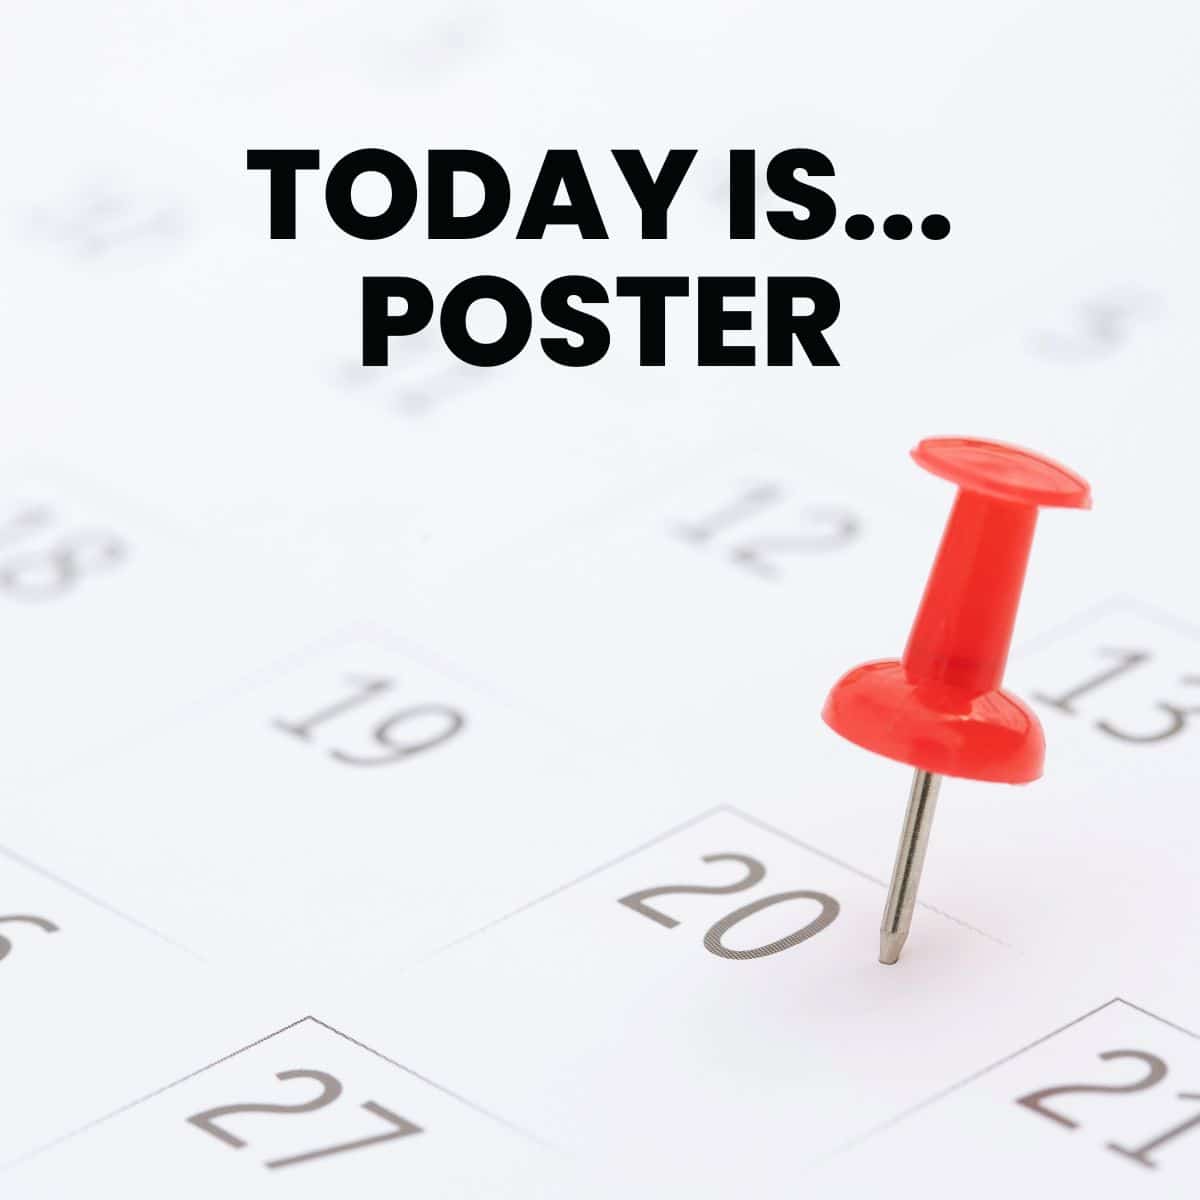 close-up of calendar with thumb tack. text: "today is... poster"